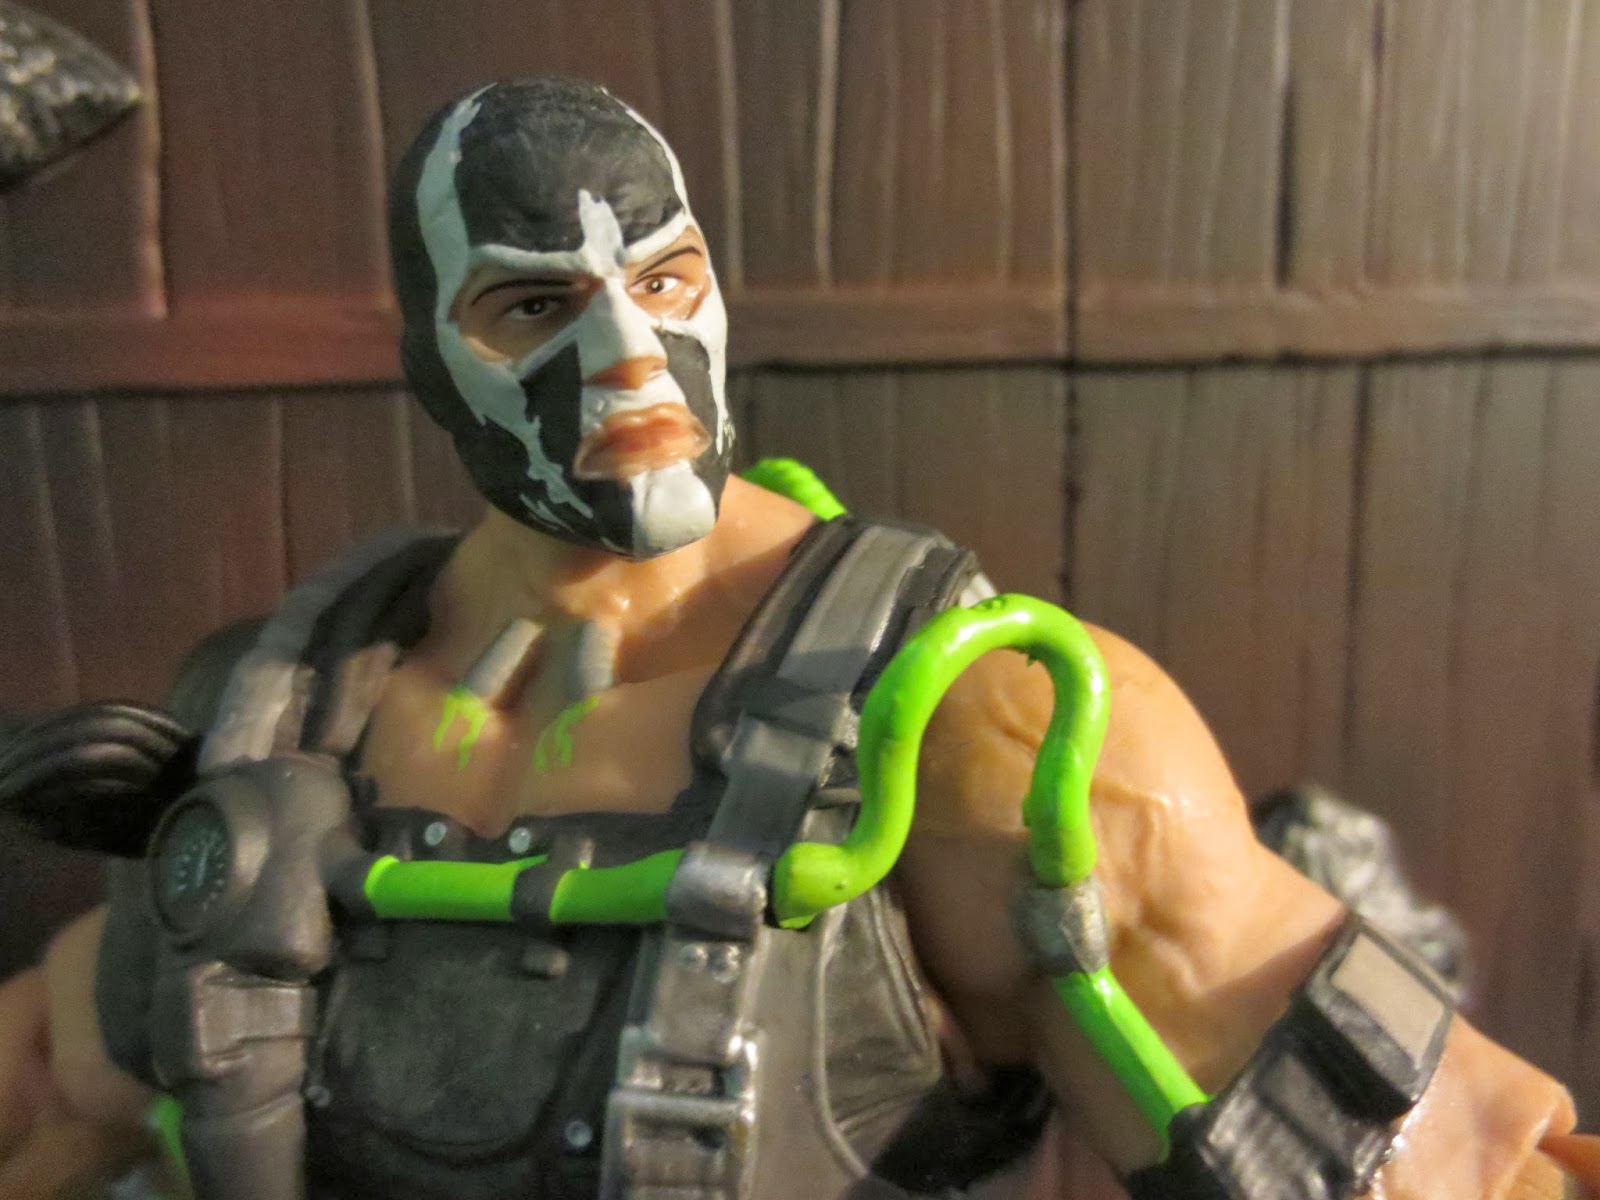 The Epic Review: Action Figure Review: Bane from Arkham Origins